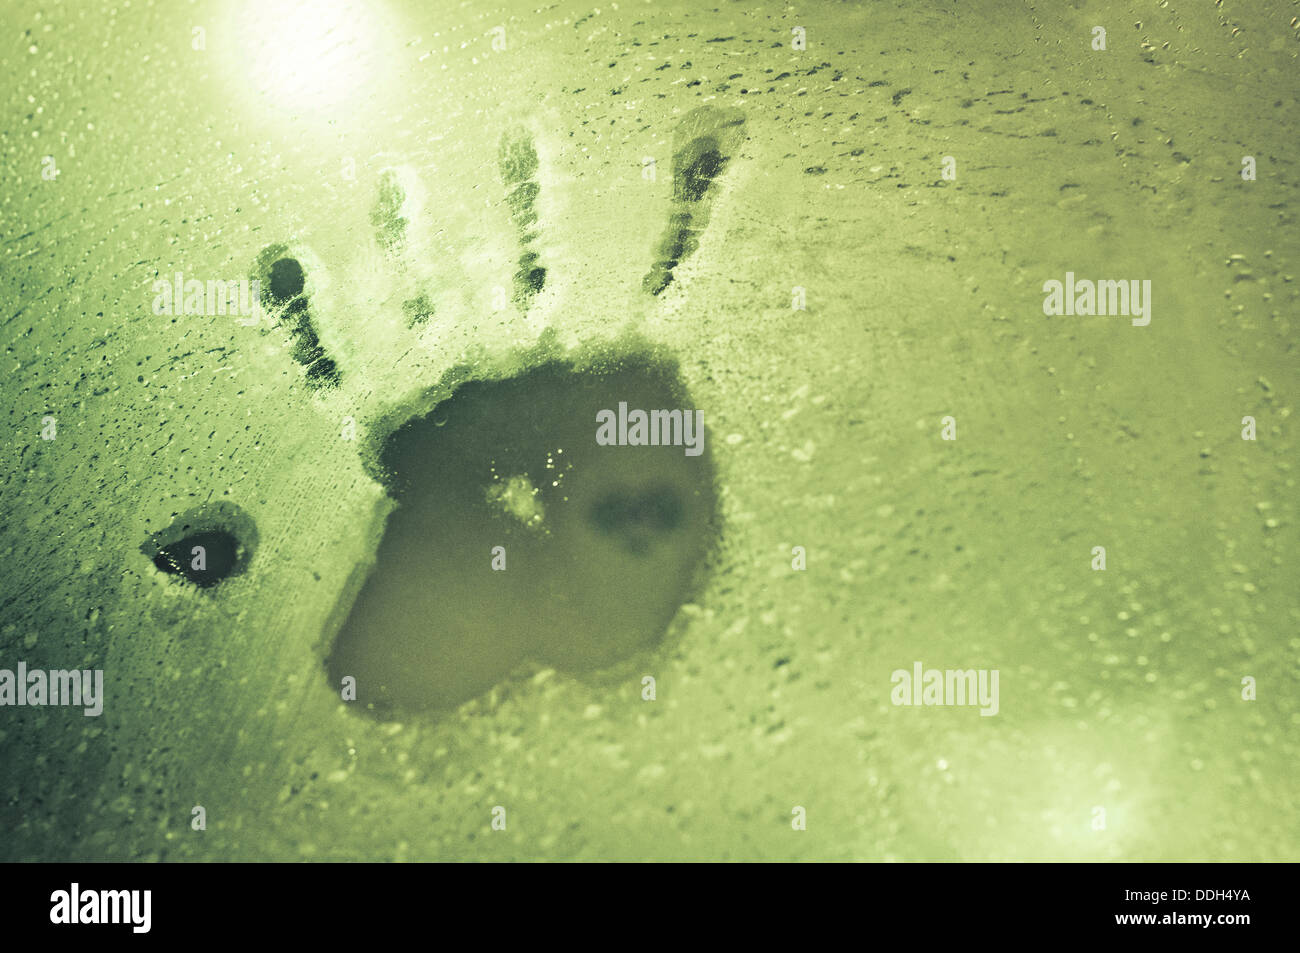 a hand print appears on a glass with water dews. Stock Photo